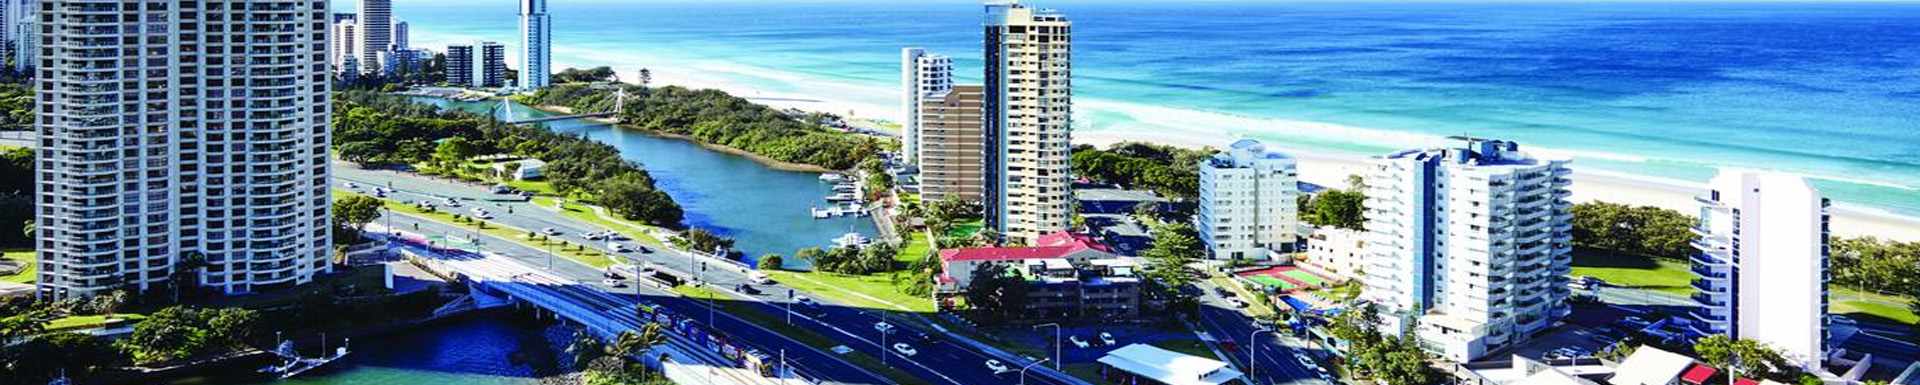 Marriott Vacation Club® at Surfer's Paradise